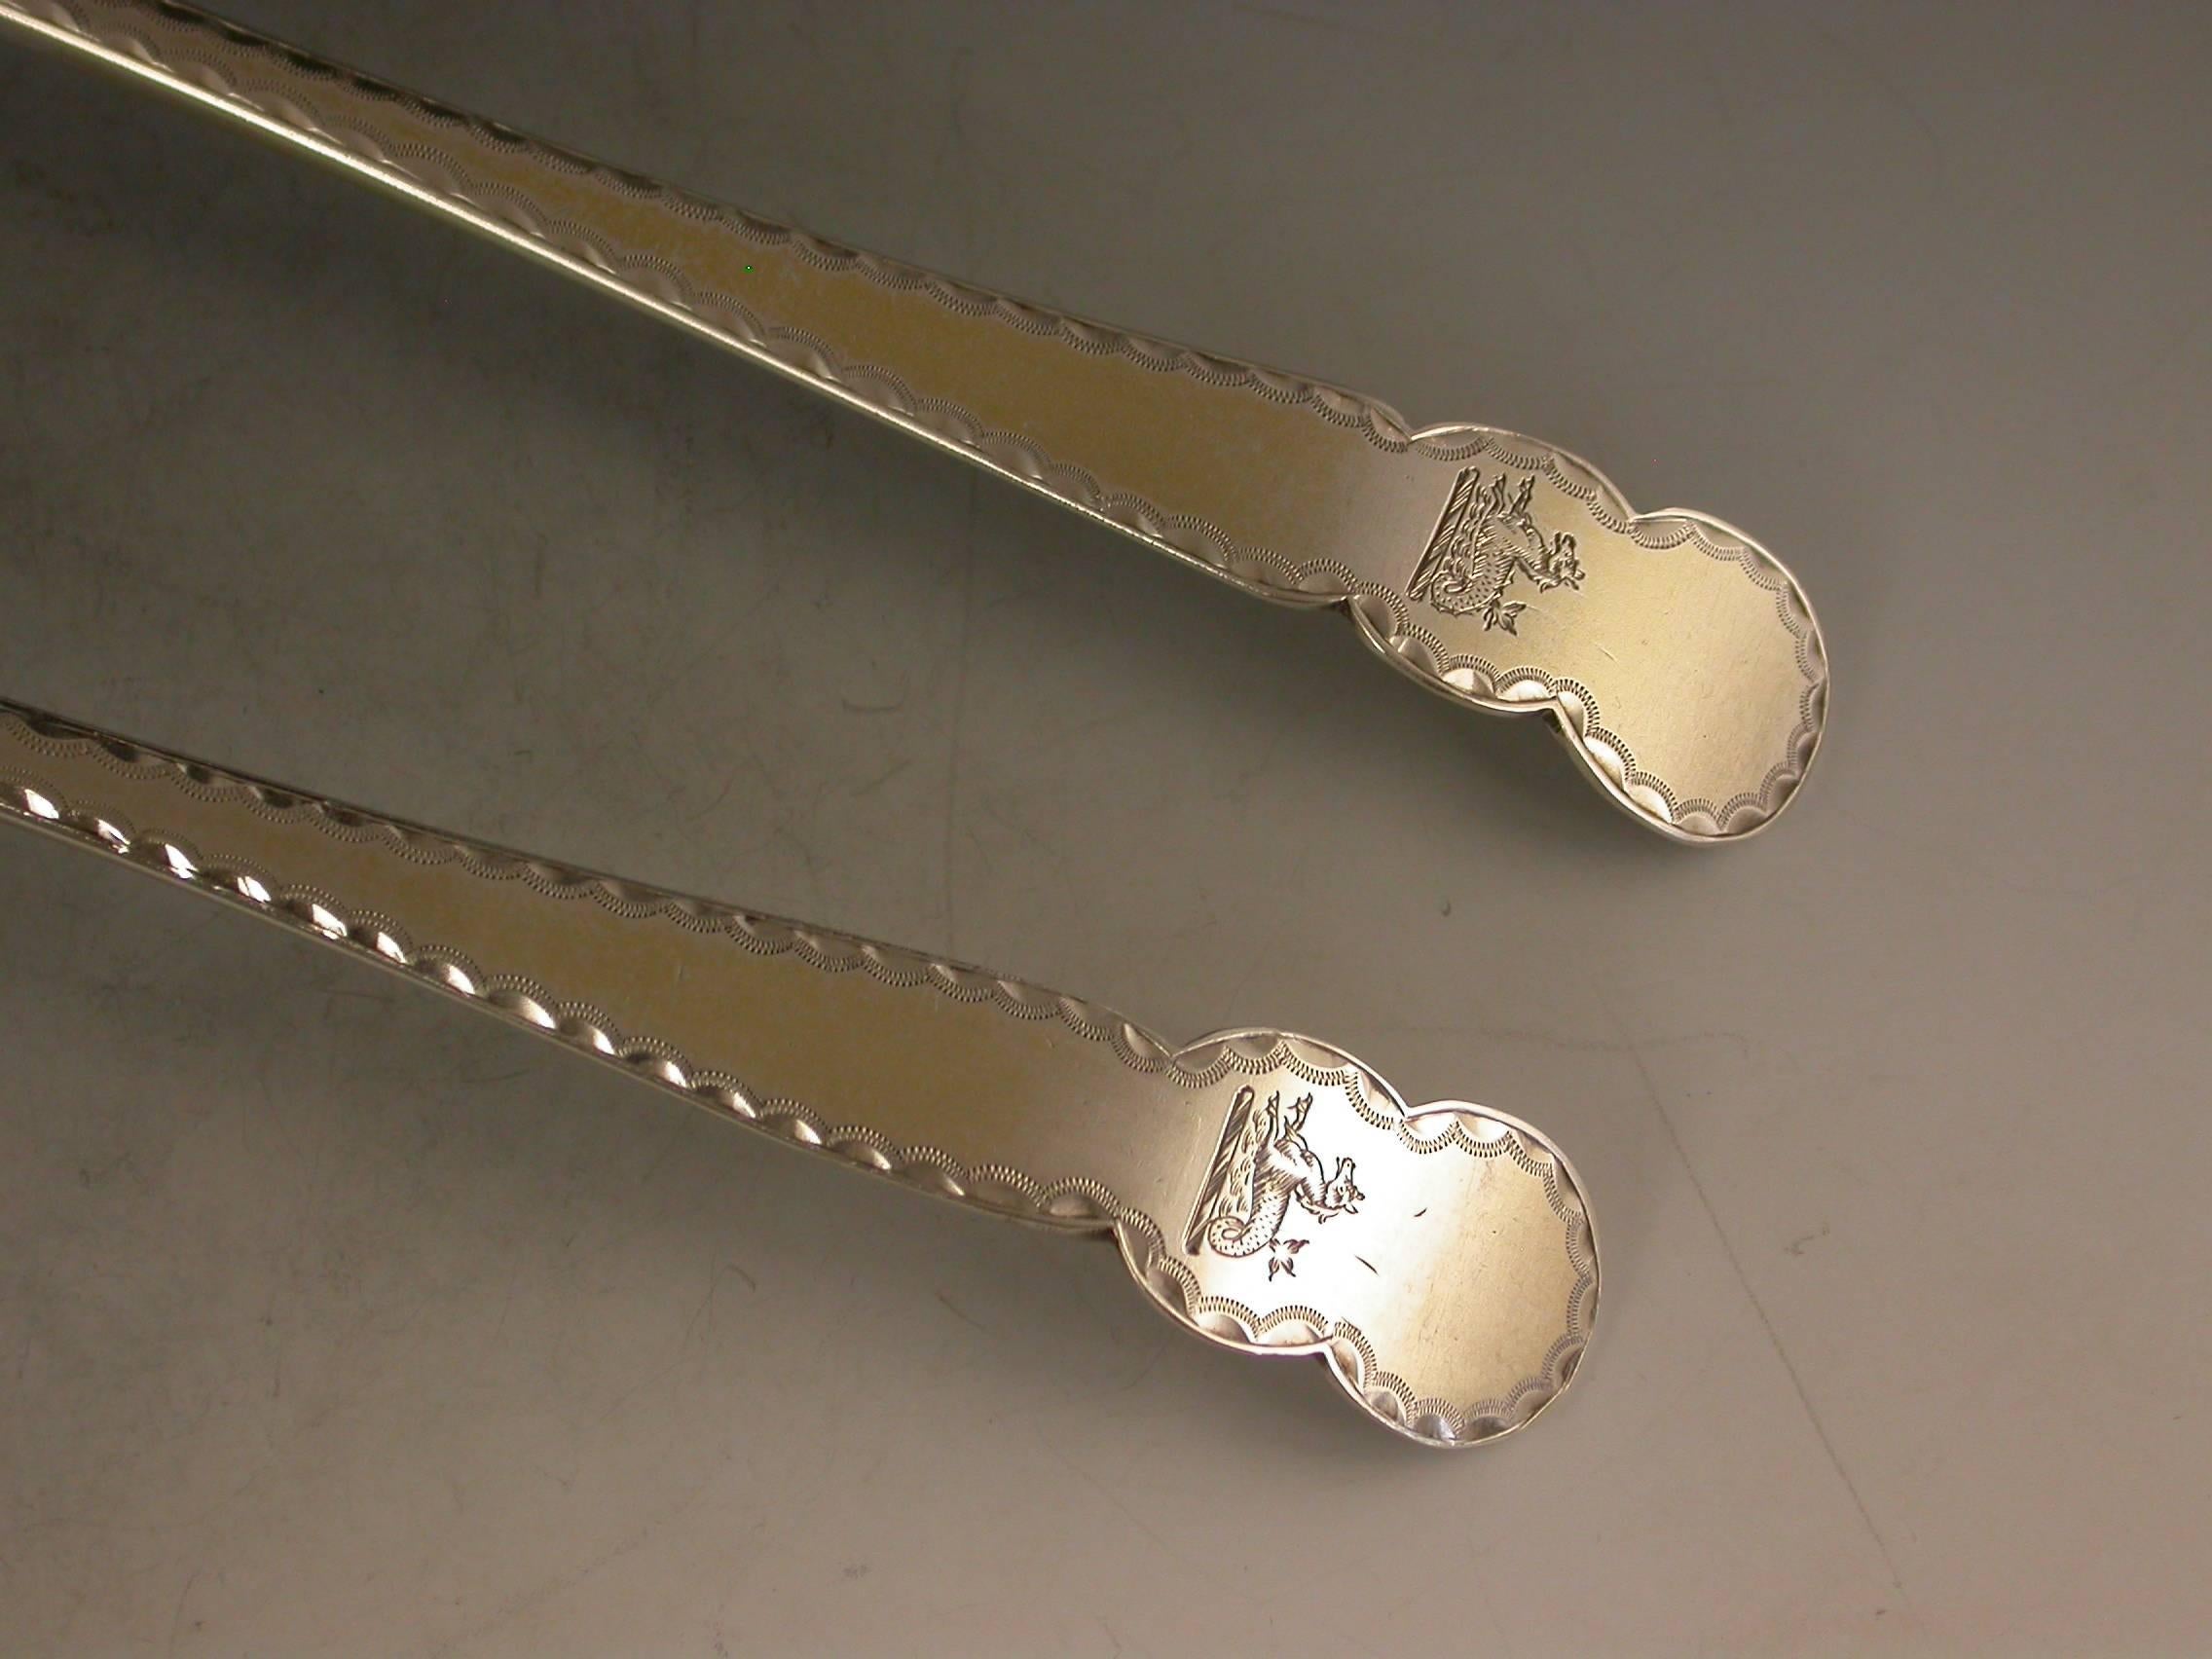 A very unusual pair of George III silver gilt table spoons with fluted bowls, the shaped Old English type handles with bright-cut engraved borders and of a pattern not previously encountered. Engraved with contemporary crests.

By Thomas & William